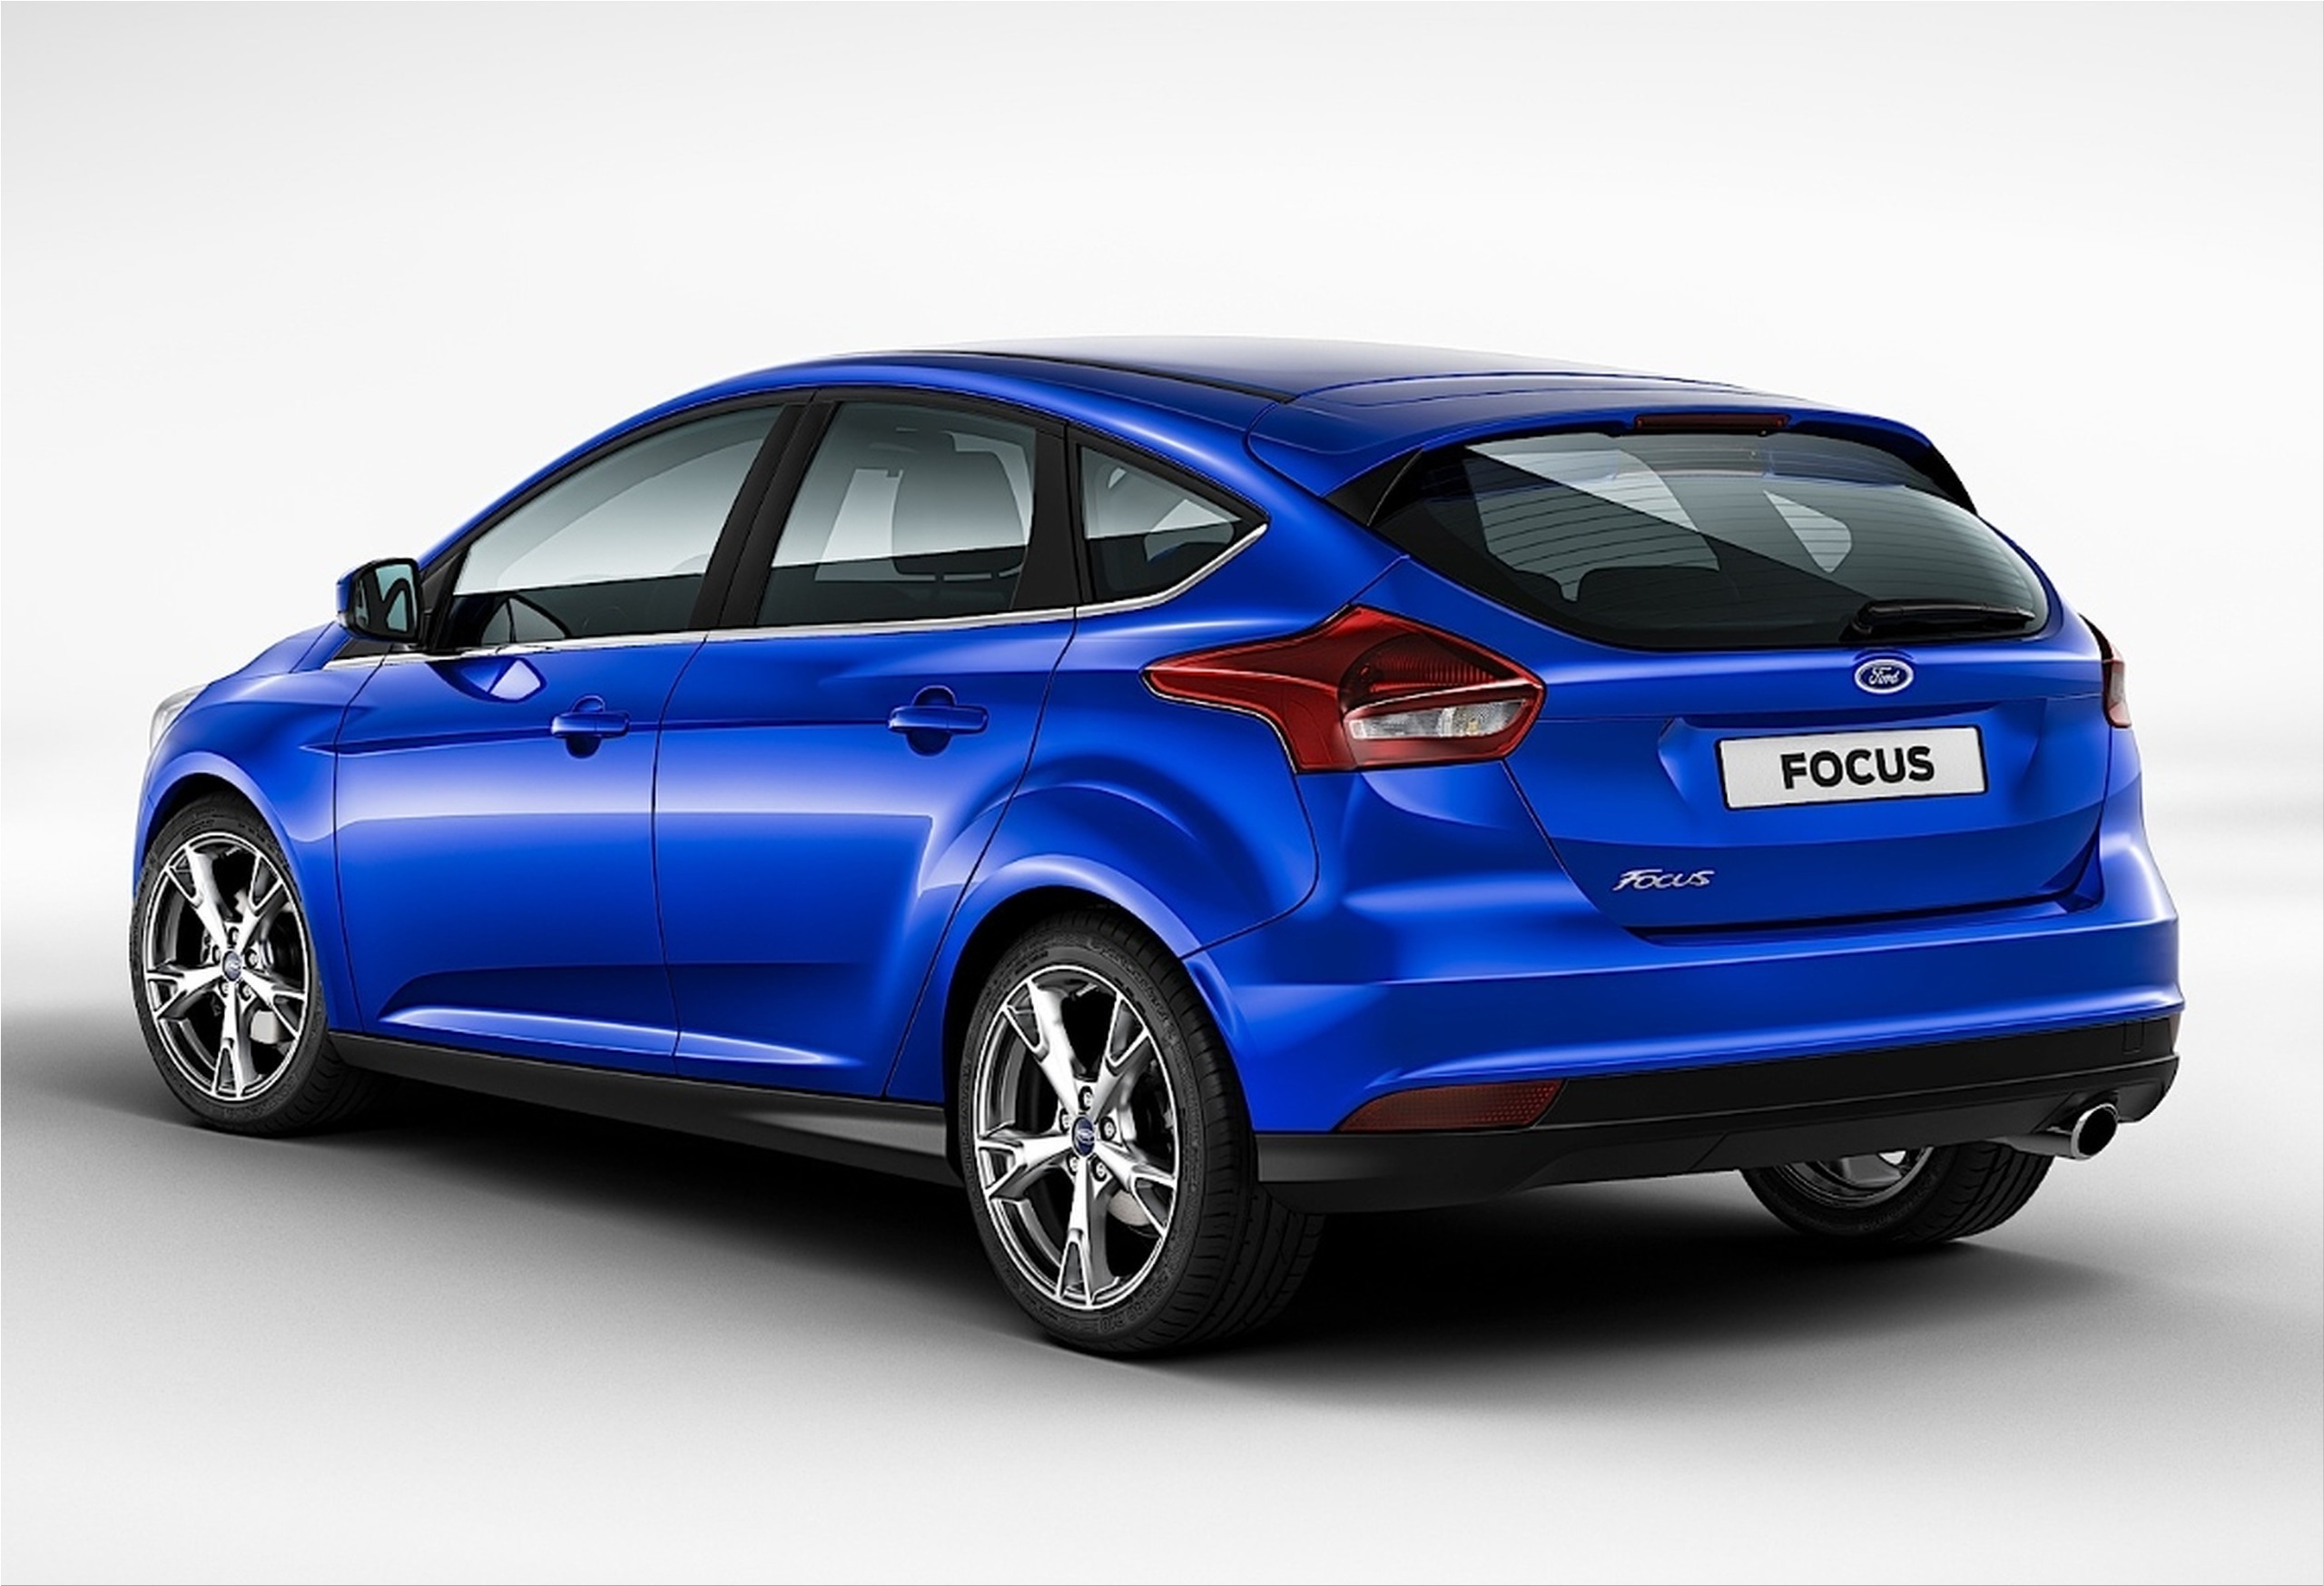 Ford Focus production will end in 2025 Nodeid